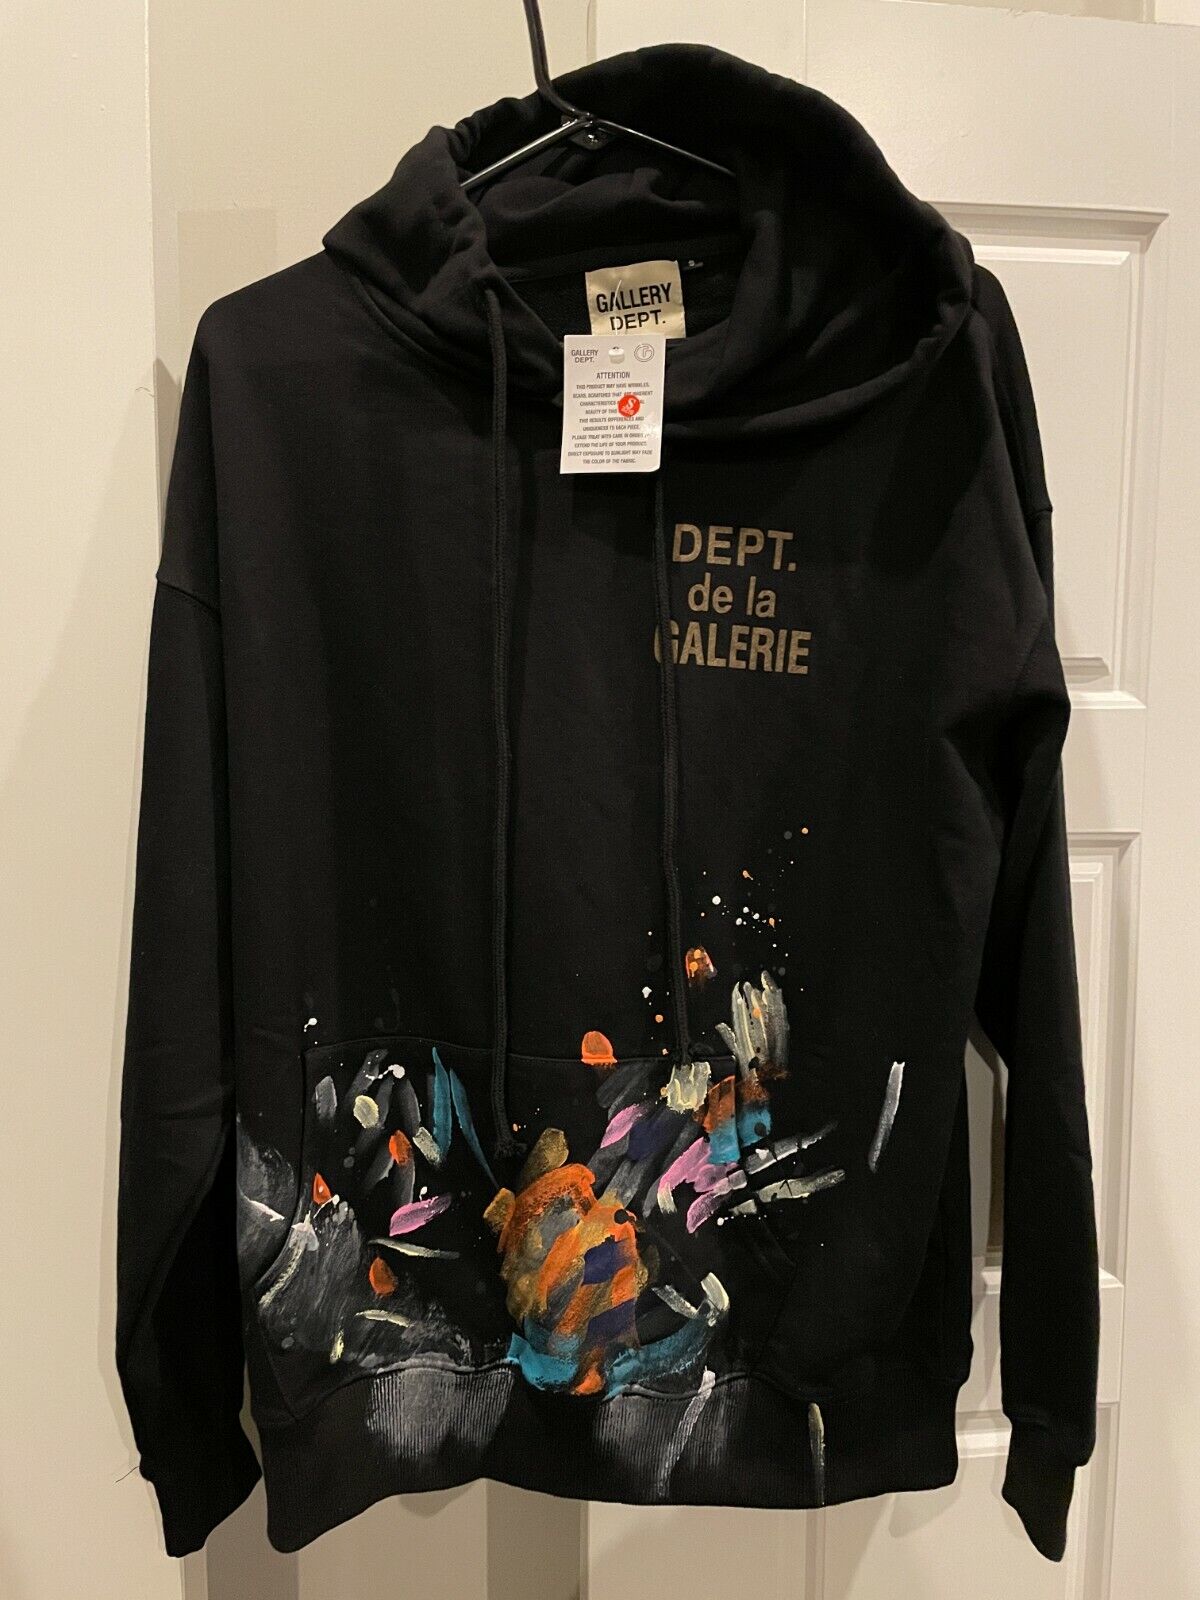 A Symbol of Pop Culture: The Gallery Dept Hoodie’s Influence and Collaborations插图